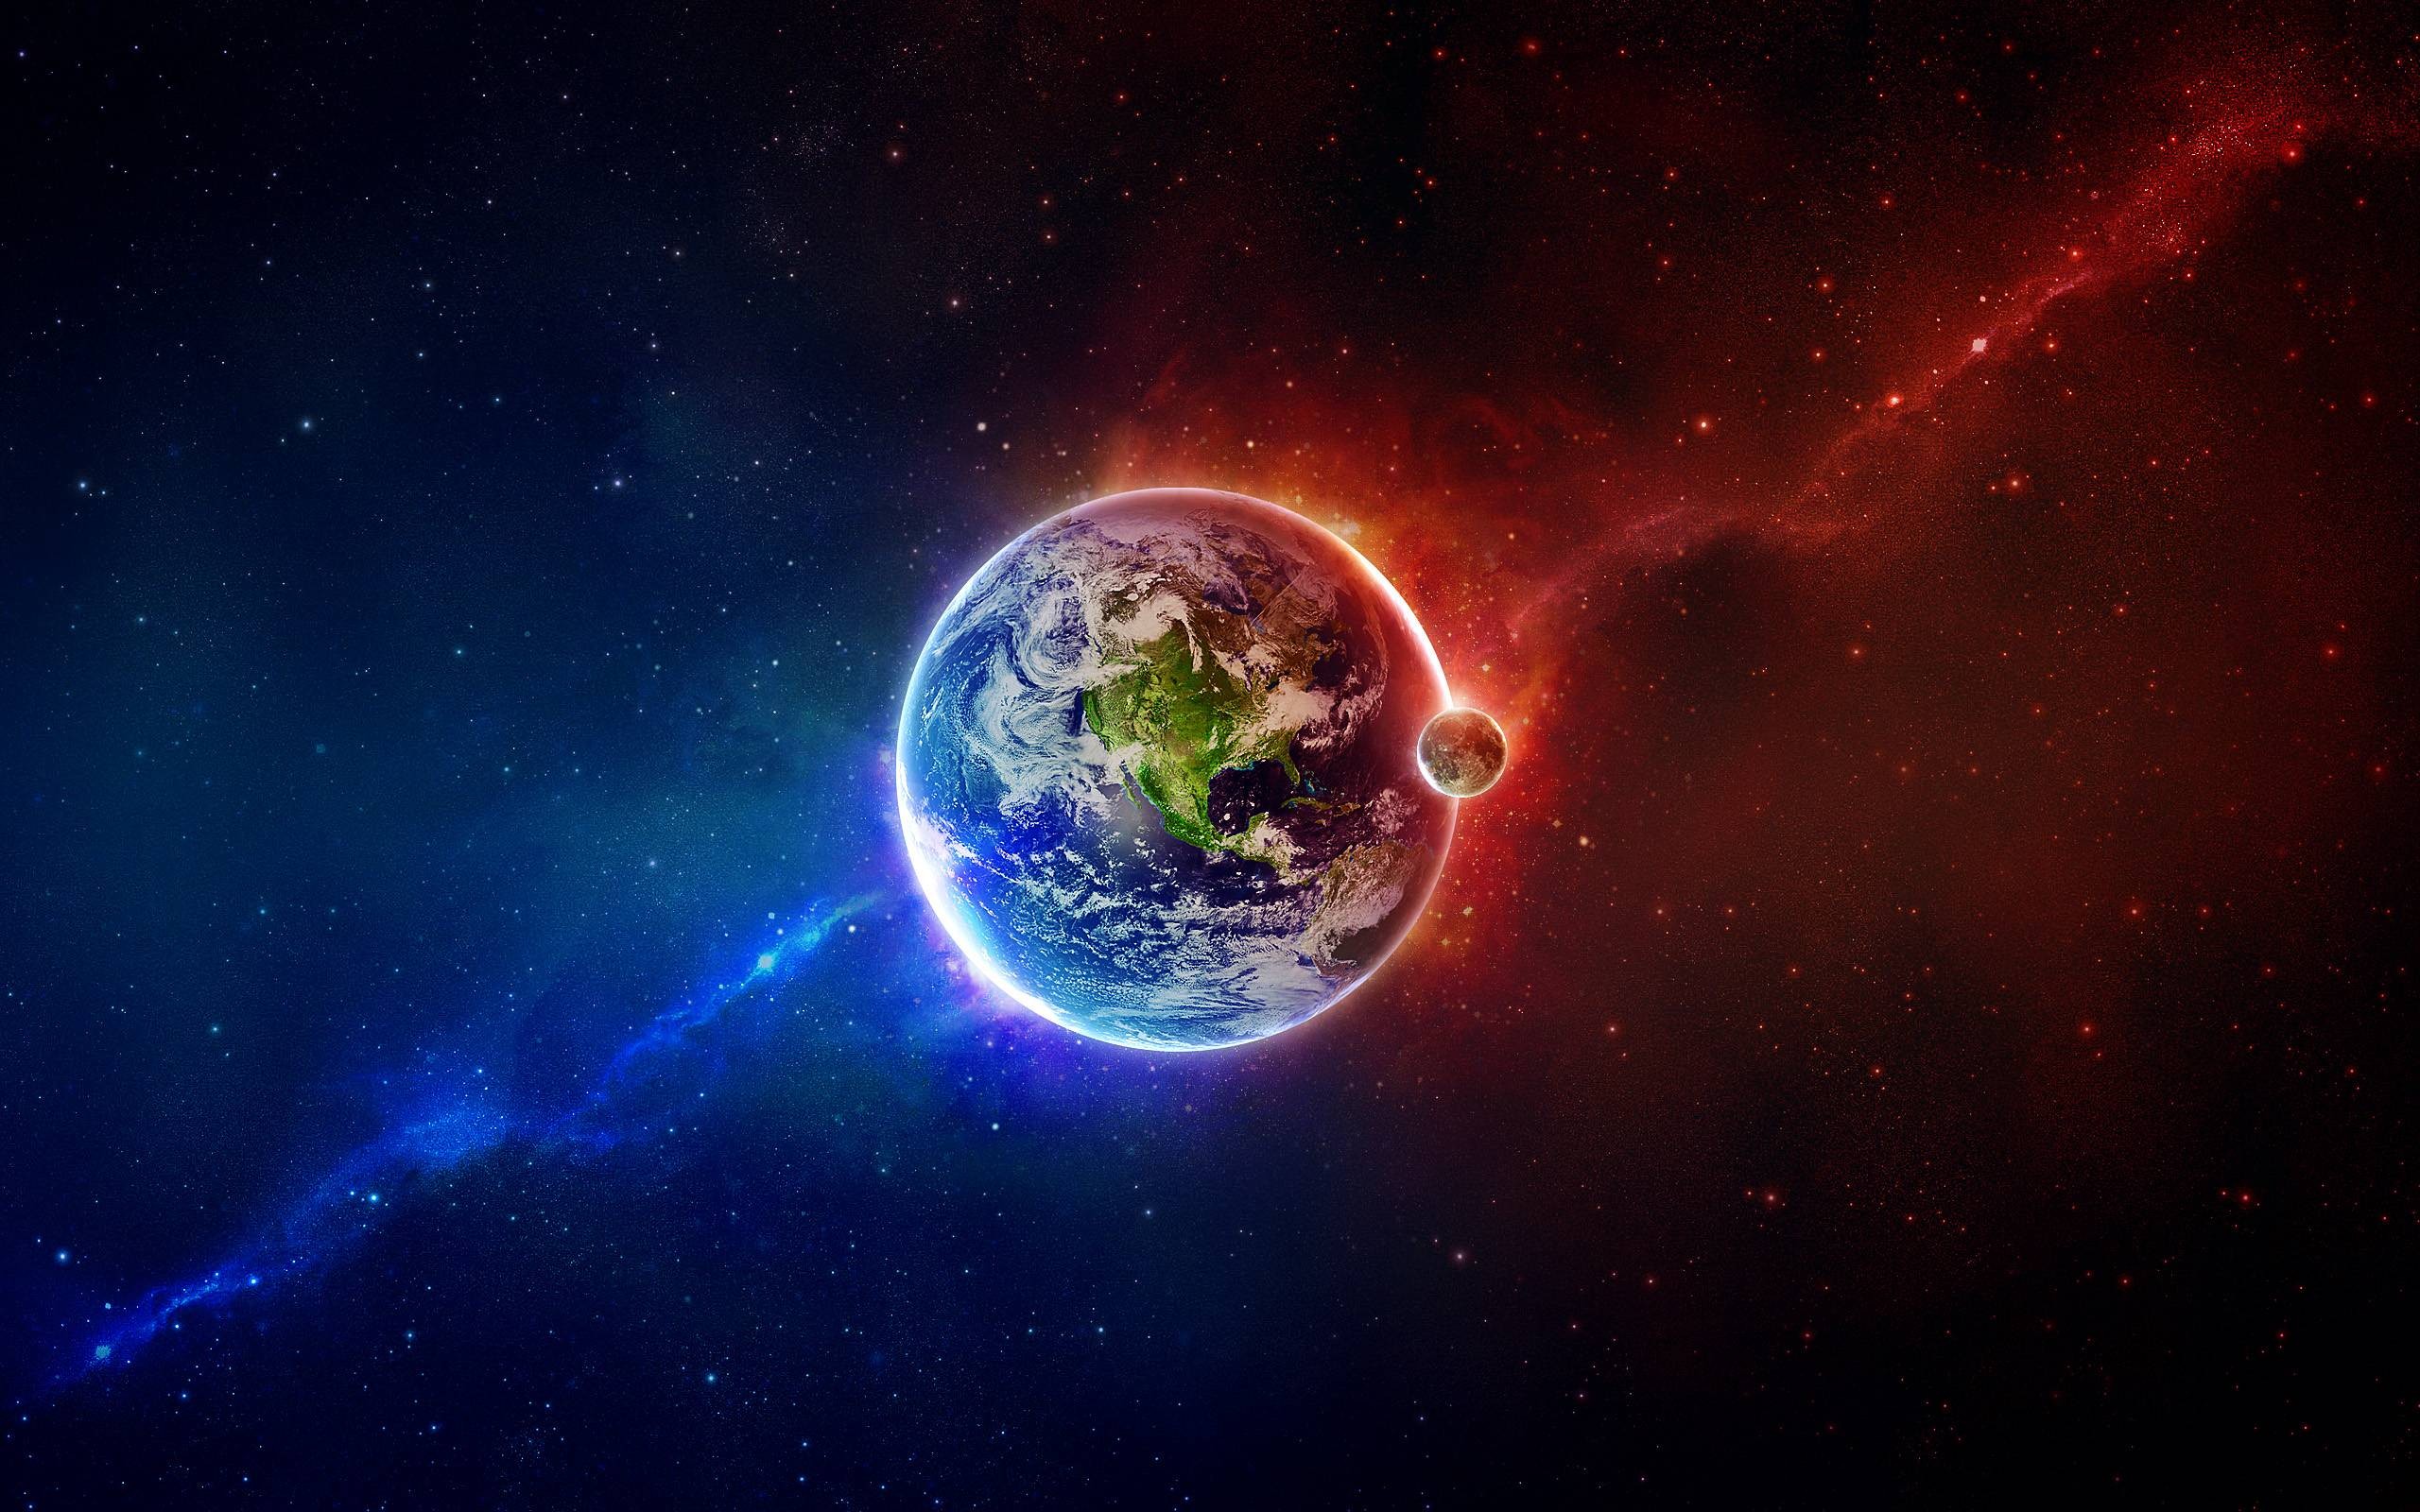 General 2560x1600 space space art planet colorful digital art stars Moon Earth